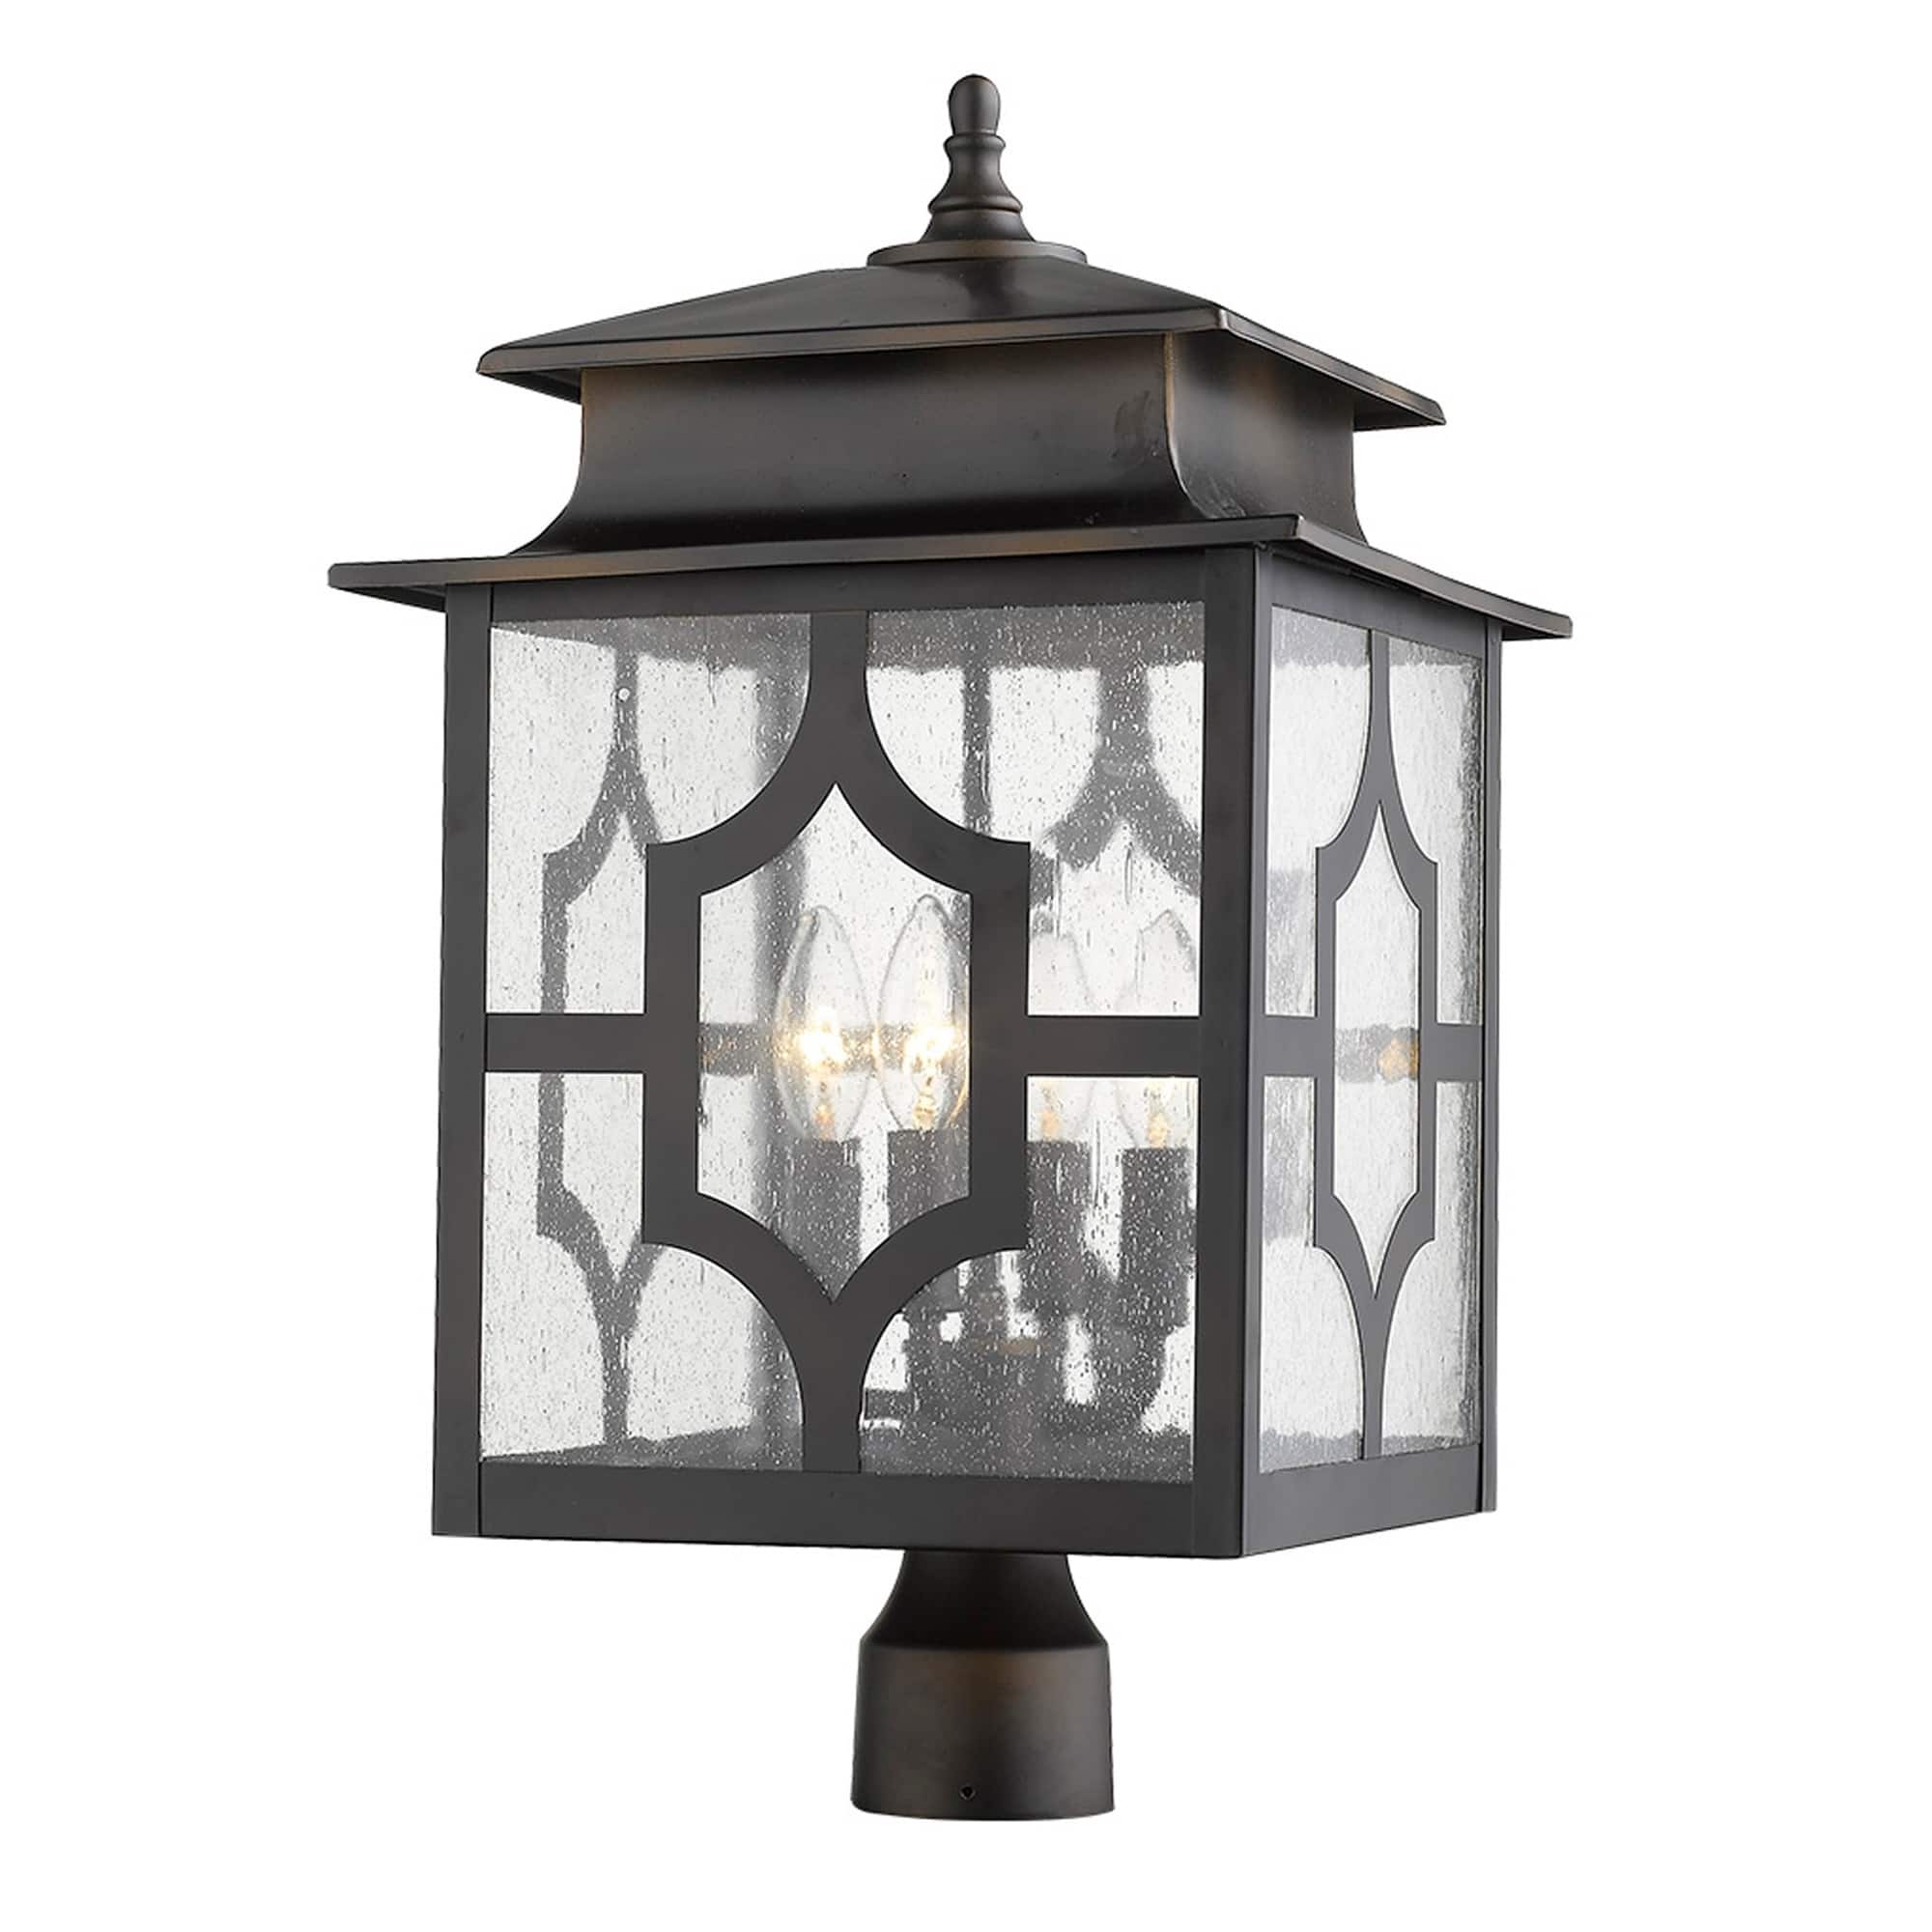 Post Lights | Find Great Outdoor Lighting Deals Shopping at Overstock